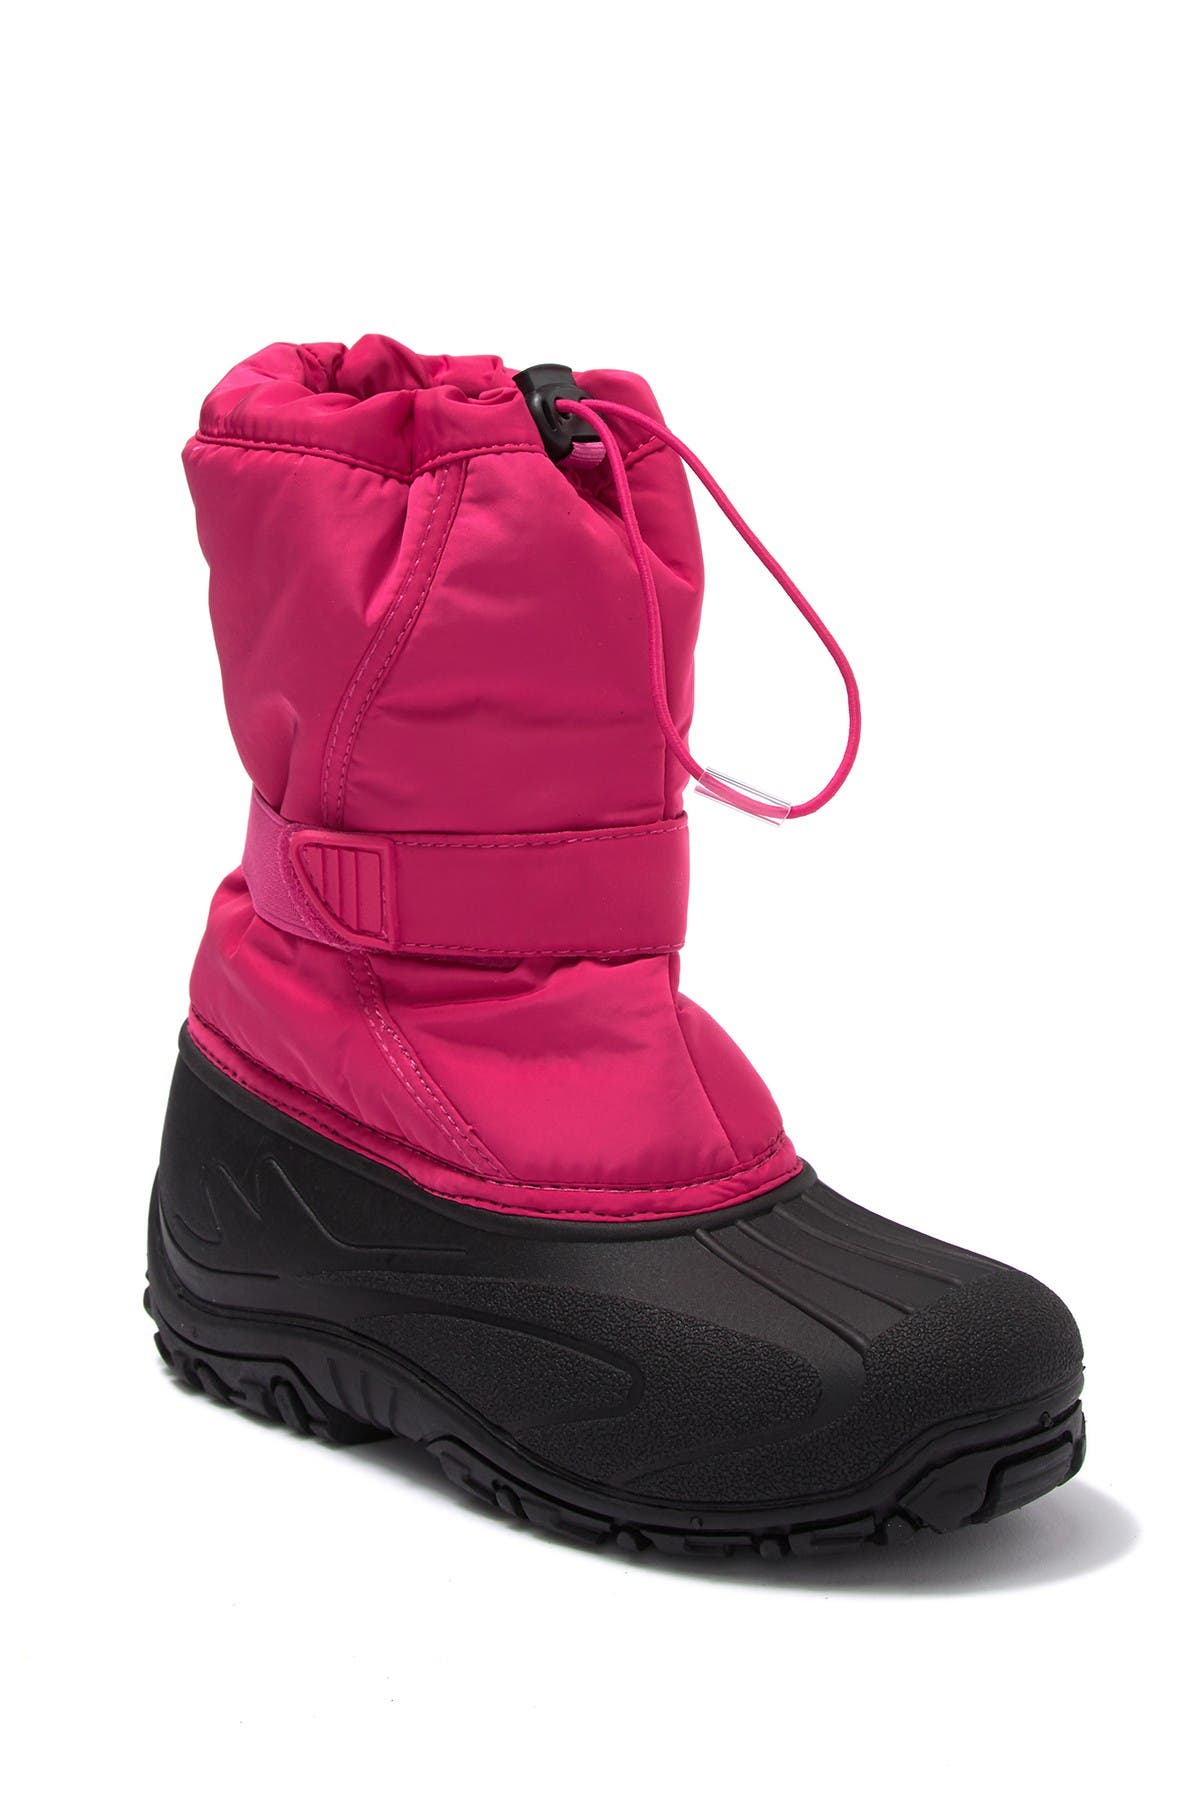 harper canyon water shoes